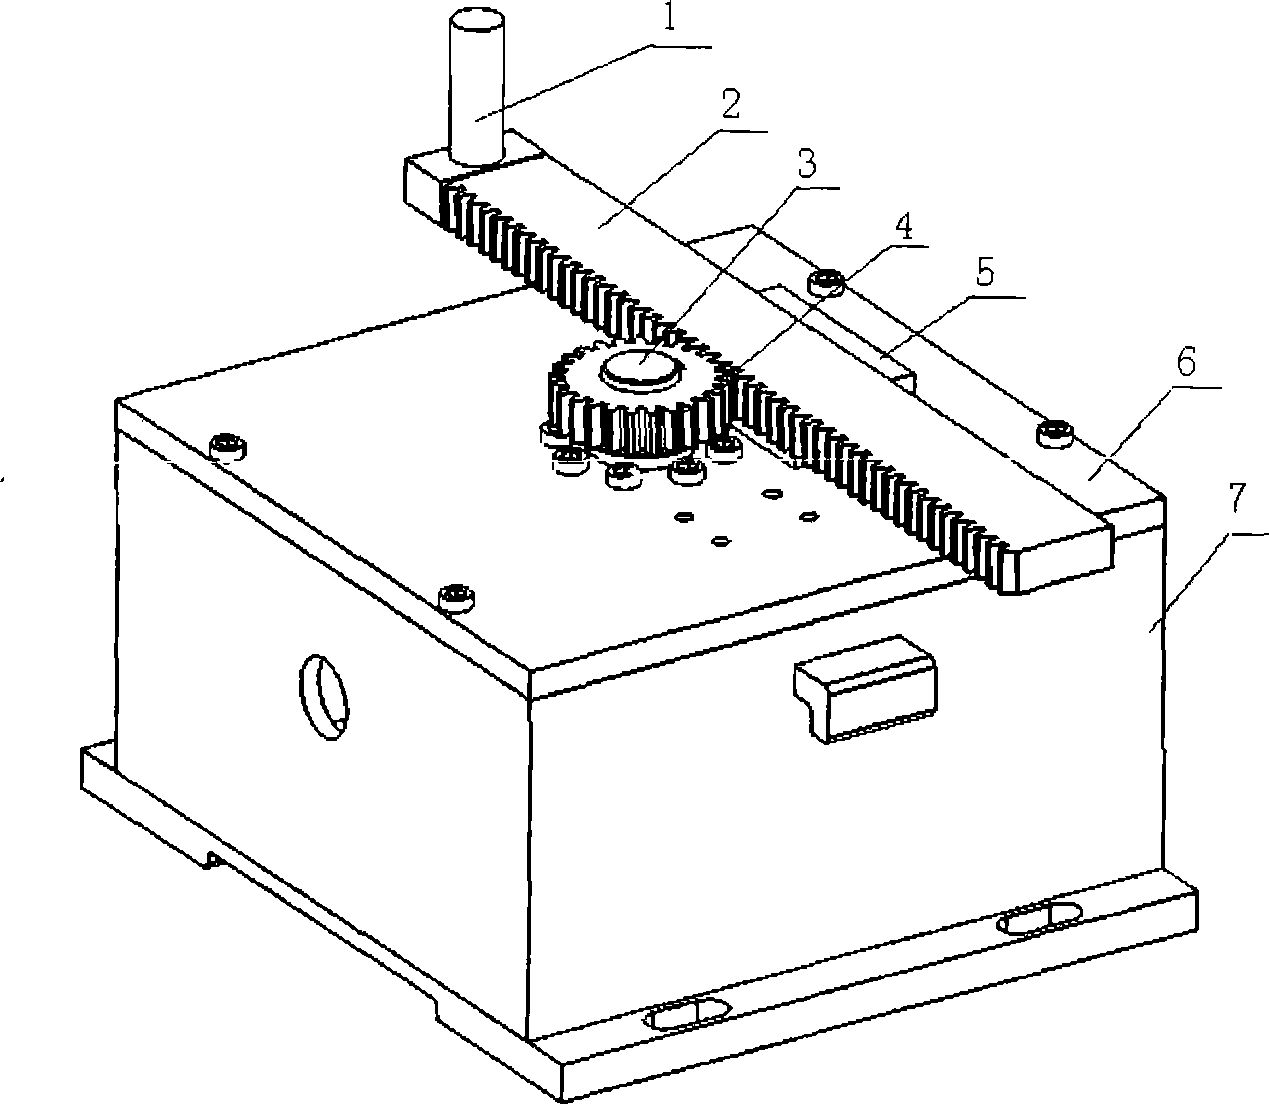 Device for calibrating relationship between current of electric machine of numerically controlled machine and cutting load